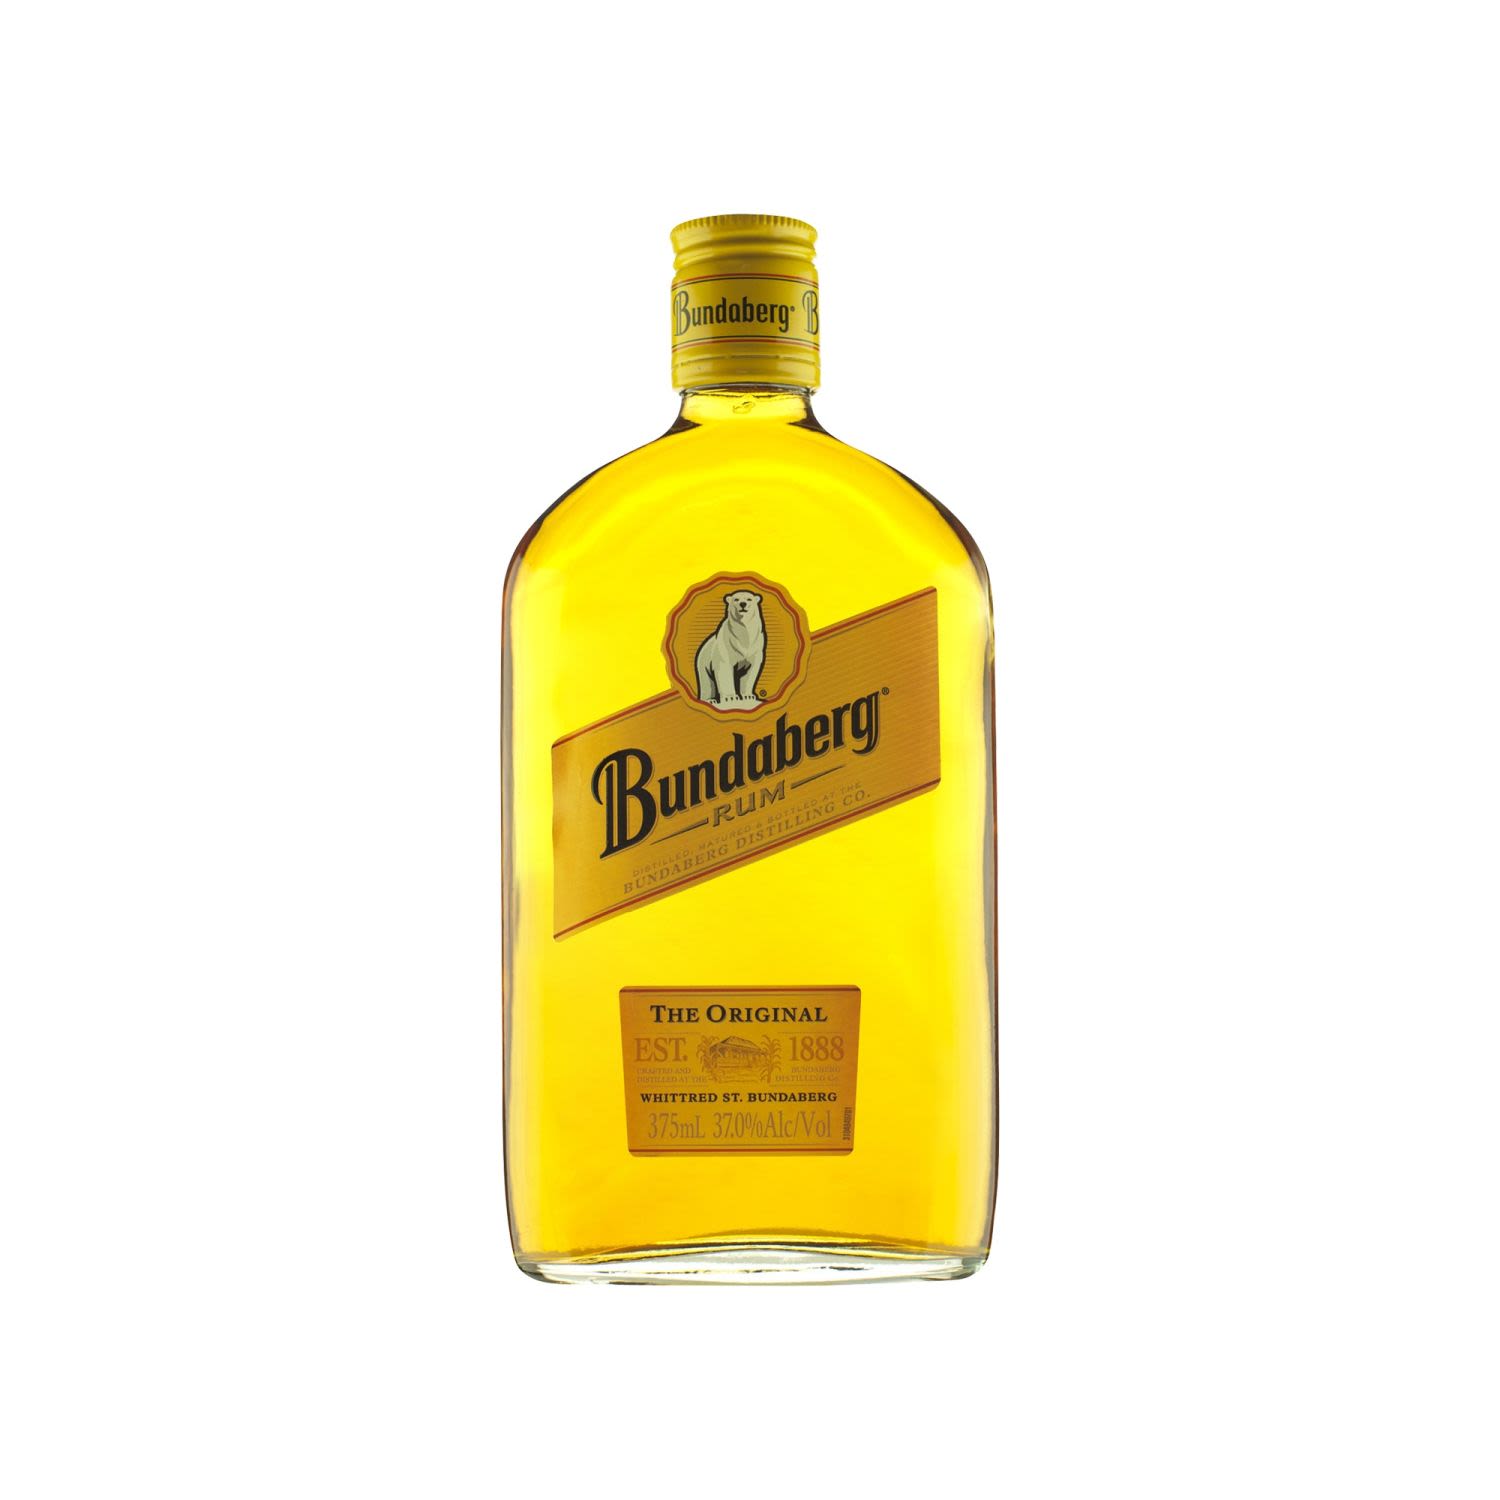 Rum is derived from sugar cane and this really shines through in Bundaberg Rum. Molasses and caramel are the dominate flavours. Perfect in cocktails.<br /> <br />Alcohol Volume: 37.00%<br /><br />Pack Format: Bottle<br /><br />Standard Drinks: 11</br /><br />Pack Type: Bottle<br /><br />Country of Origin: Australia<br />